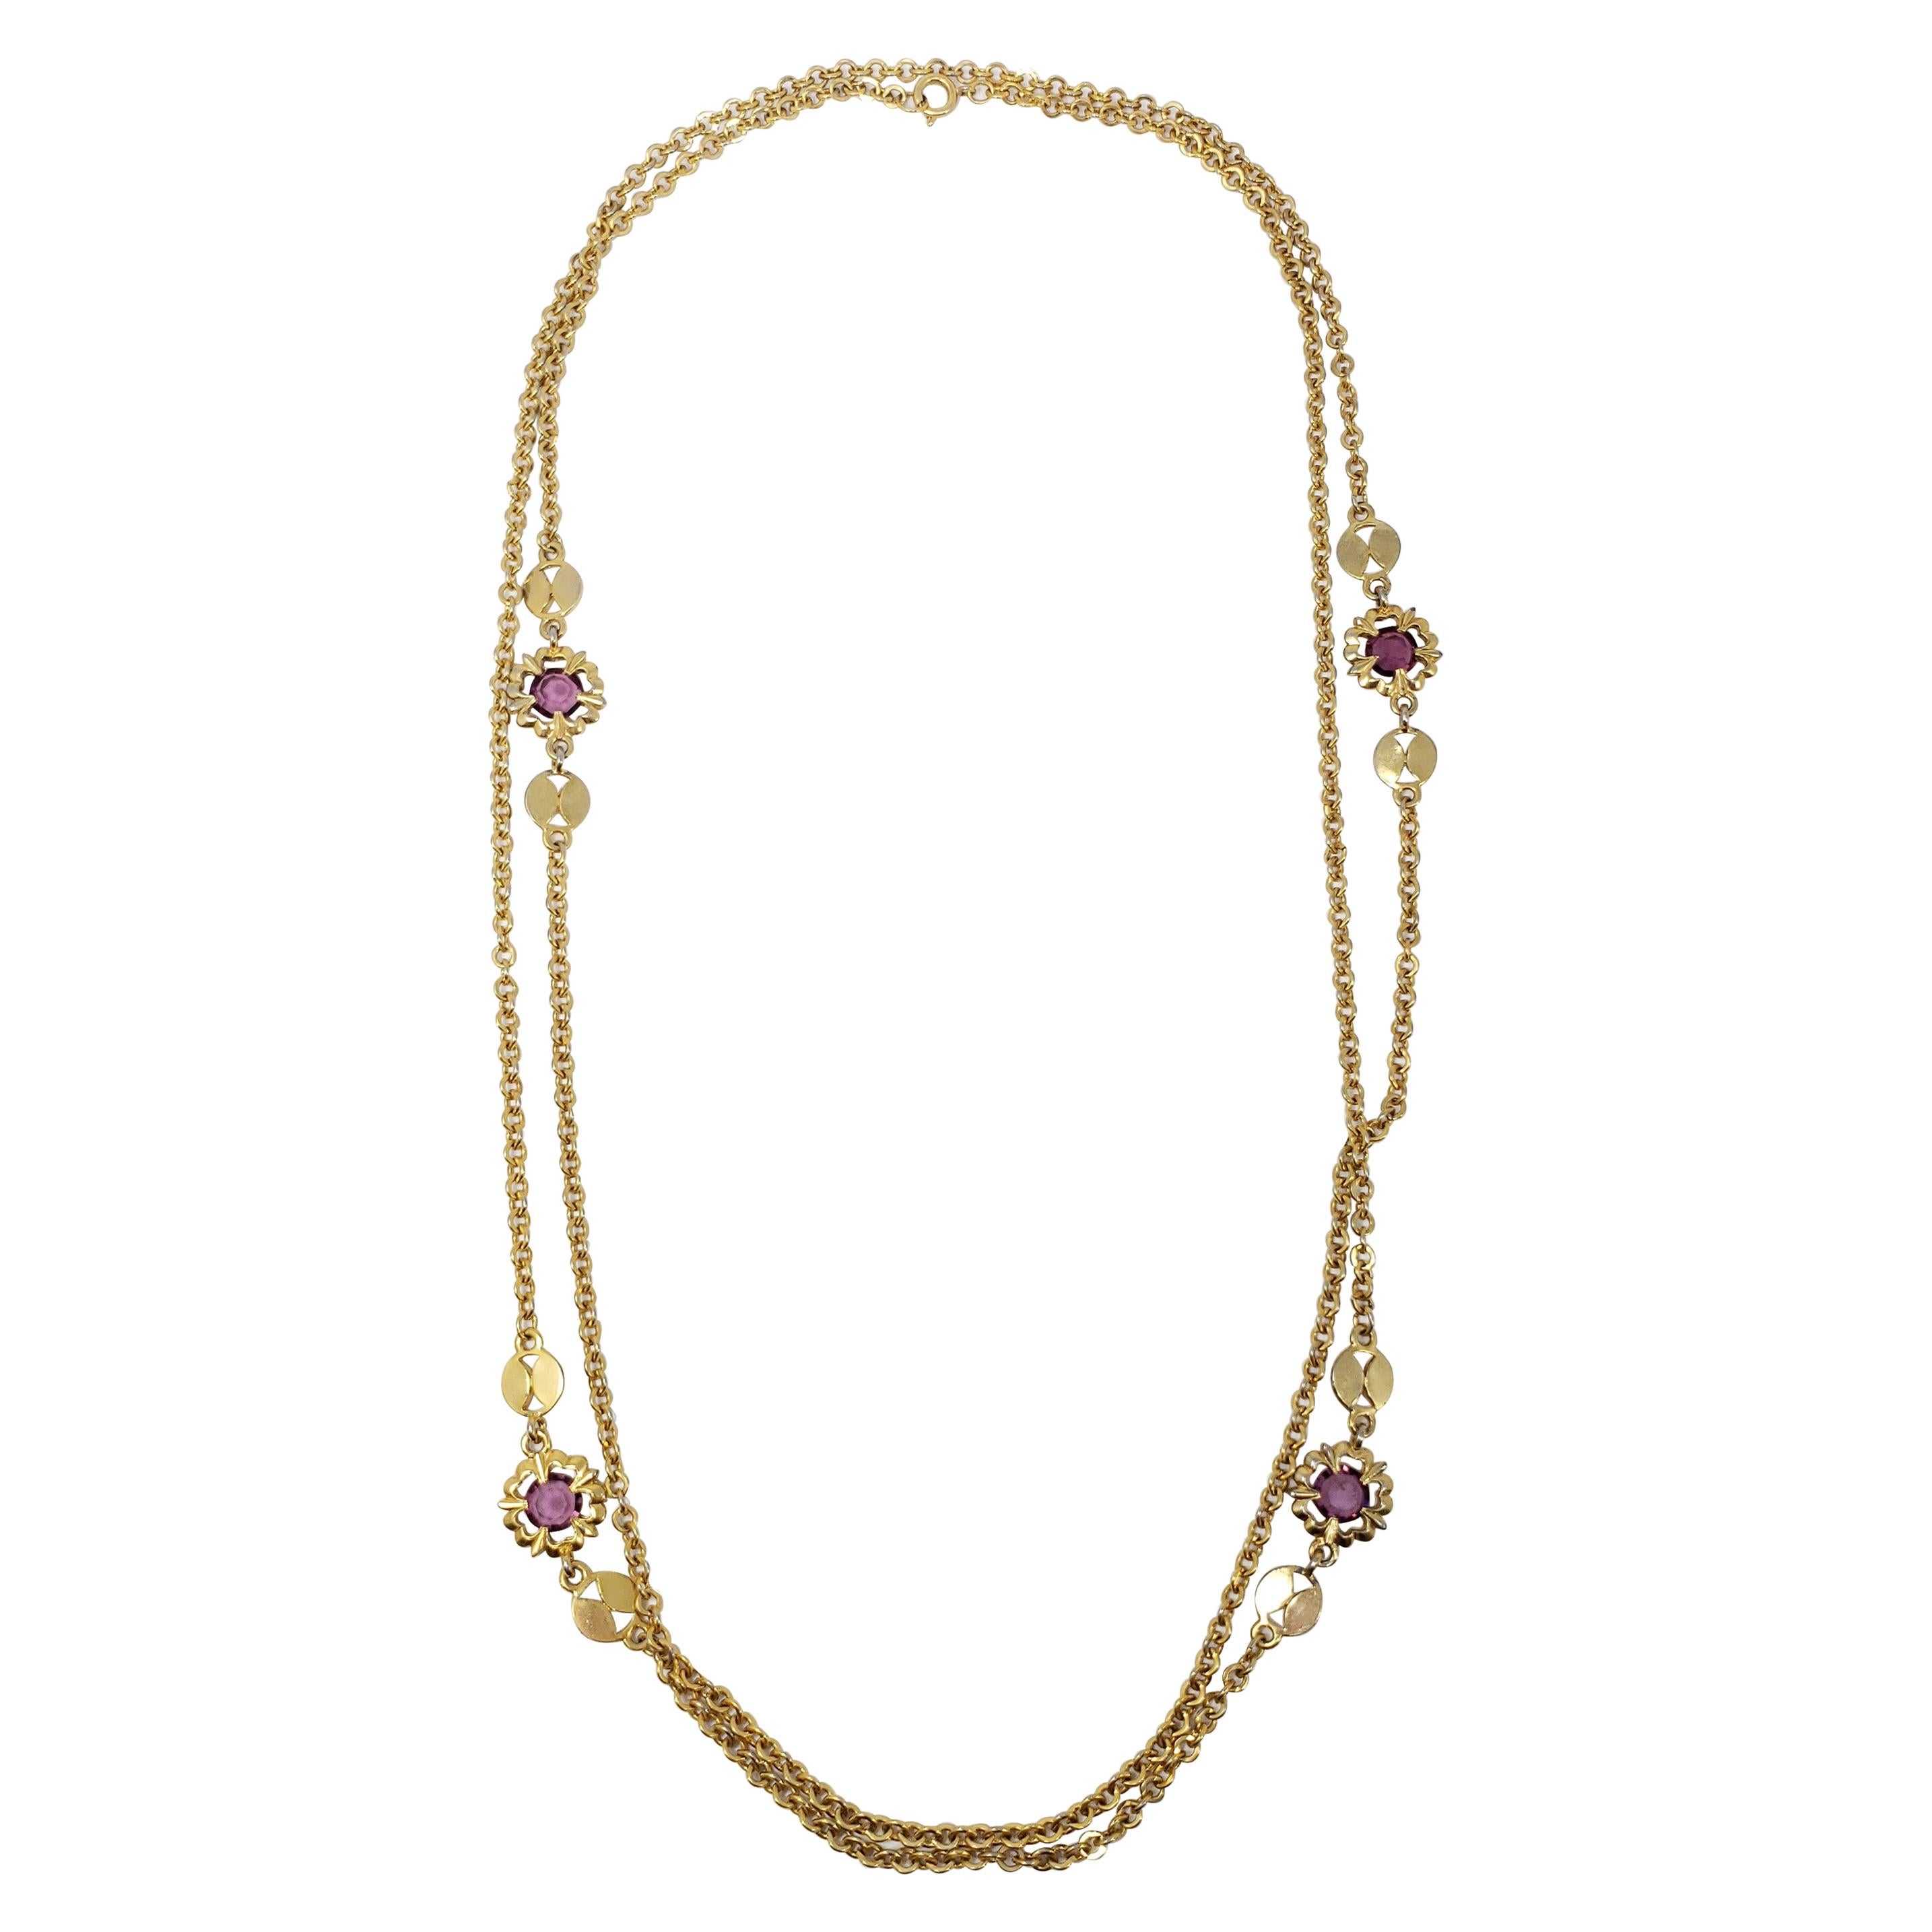 Retro Gold Chain Long Rope Necklace with Amethyst Crystals, Victorian-Style